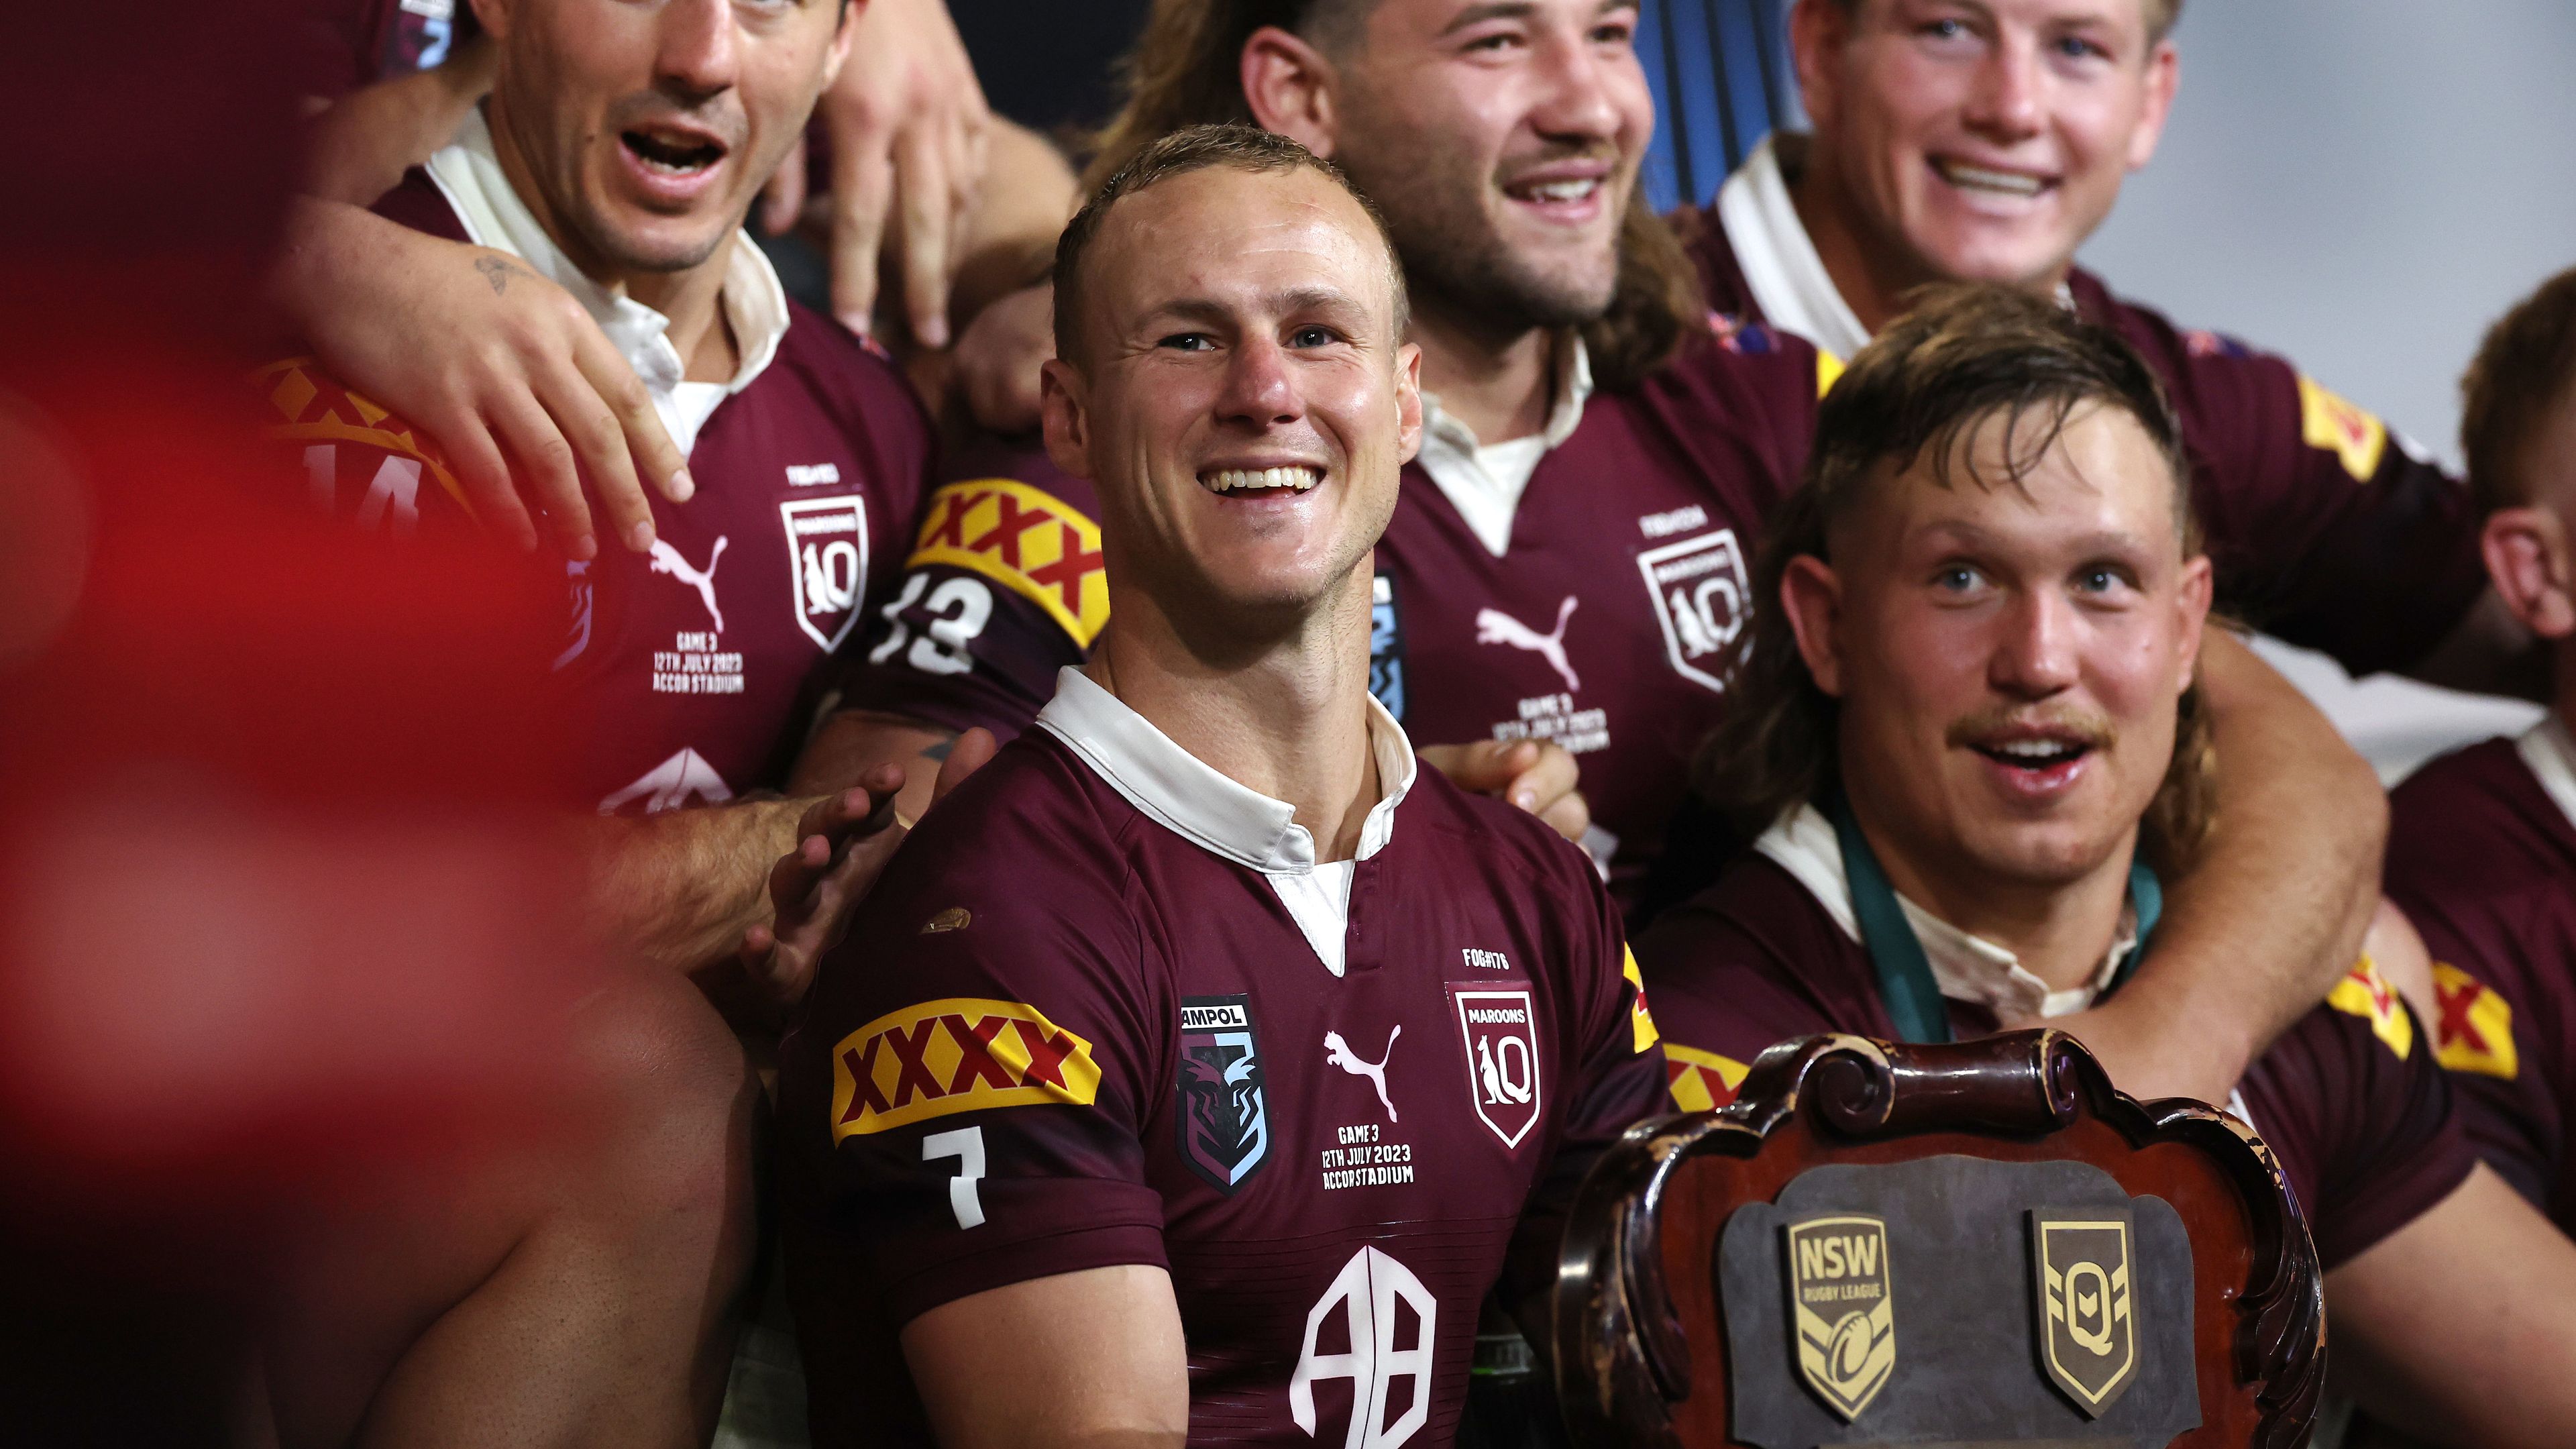 Daly Cherry-Evans of the Maroons celebrates with team mates after winning the series 2-1 after game three of the State of Origin series.